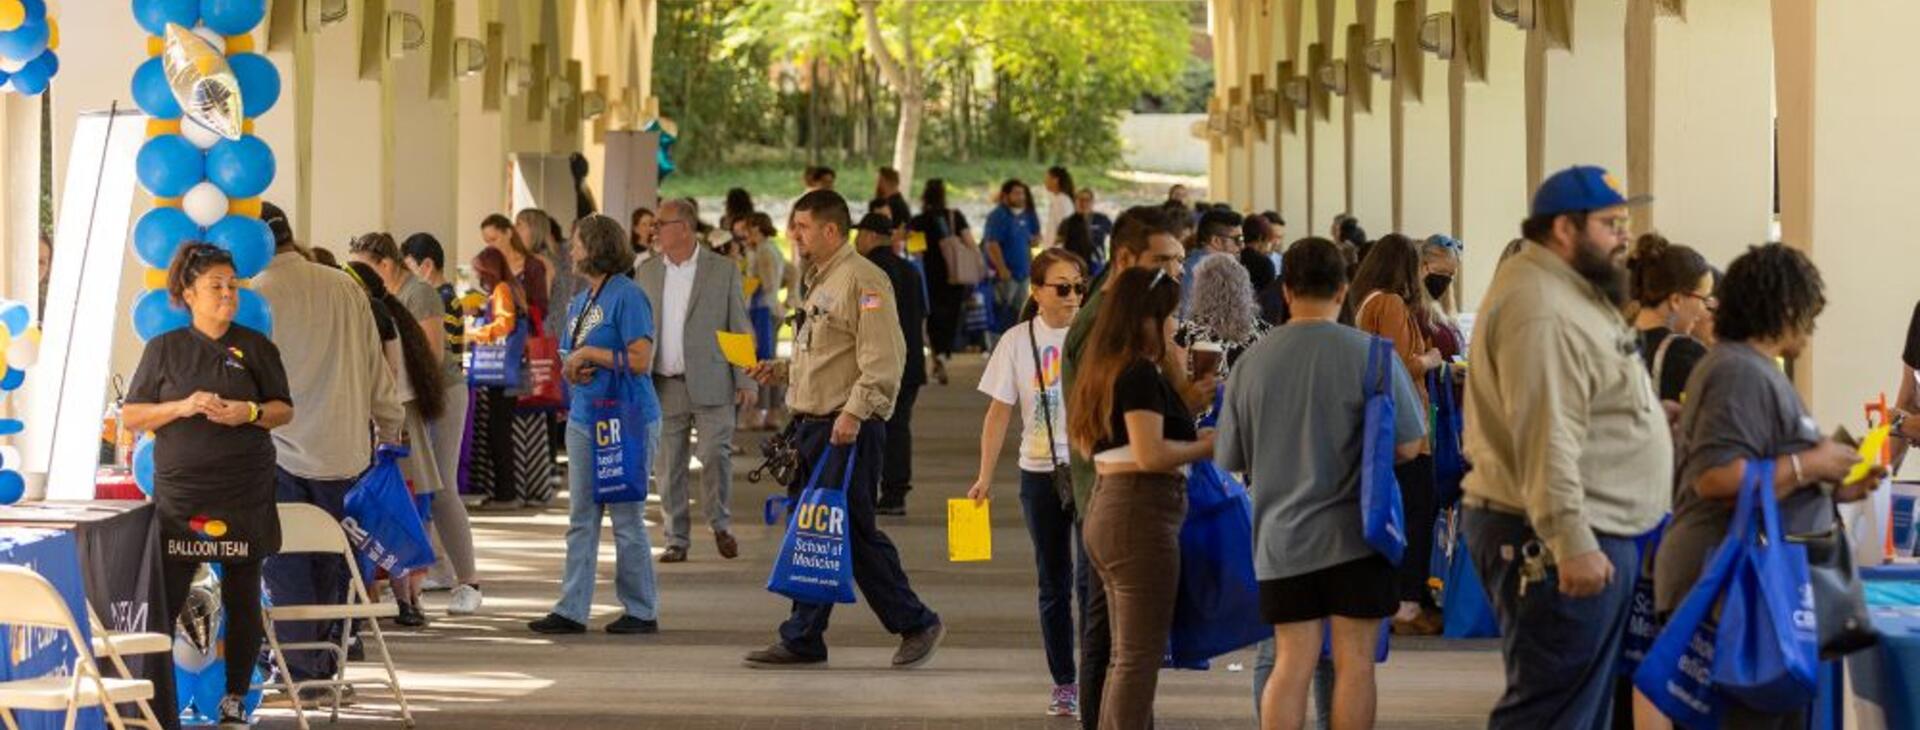 2022 Community Partner Fair attendees mingling with vendors below the Rivera Library arches